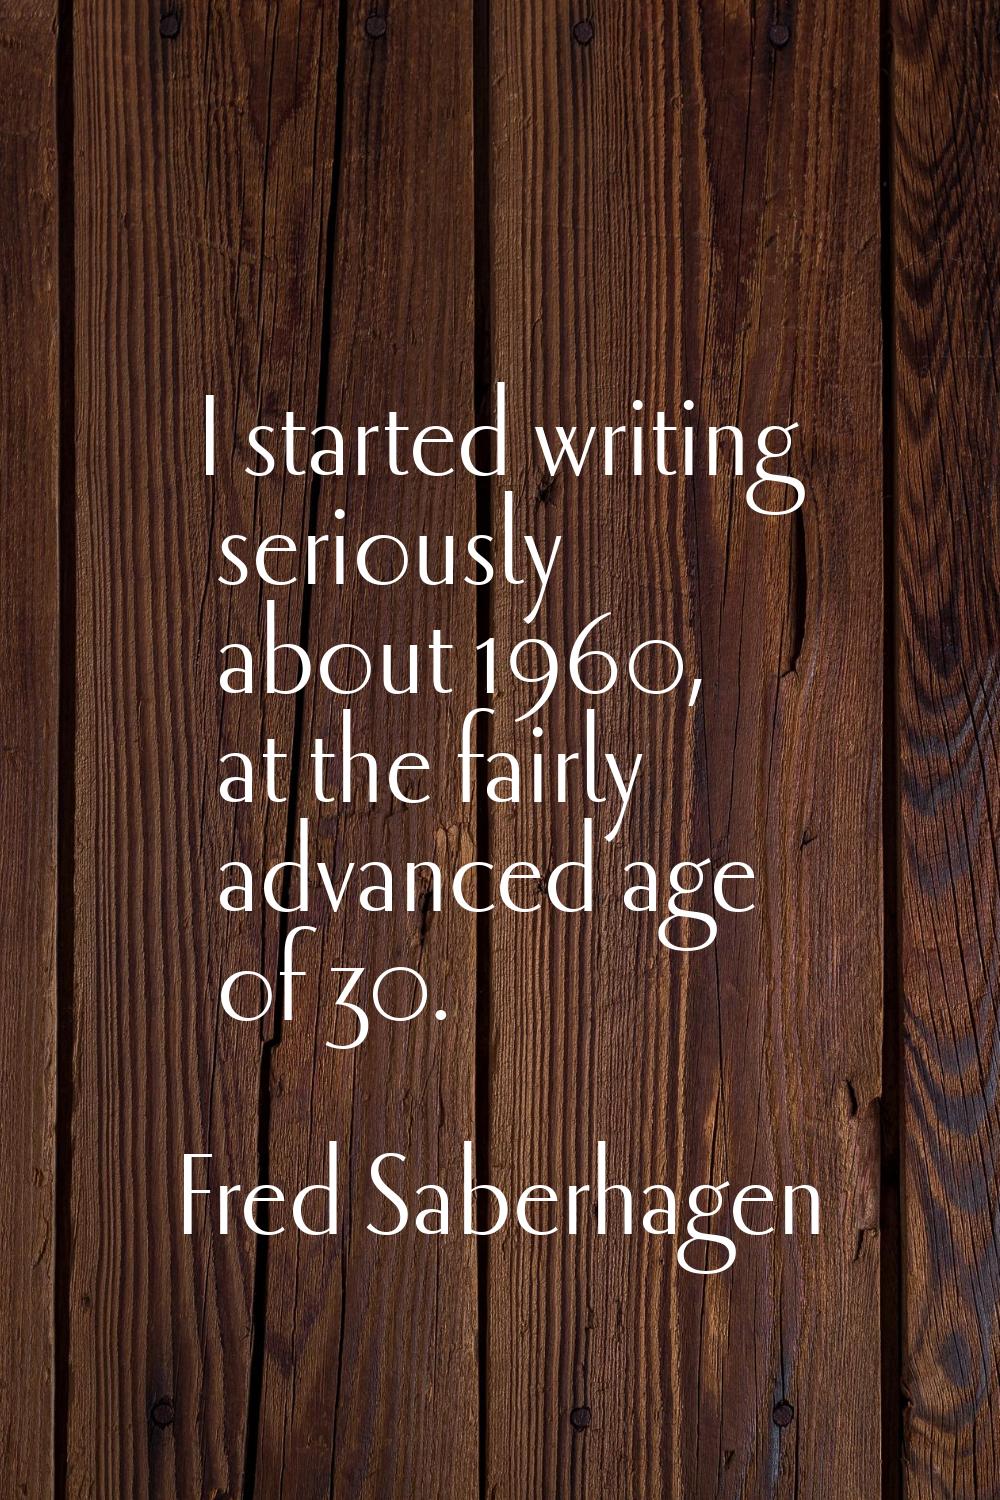 I started writing seriously about 1960, at the fairly advanced age of 30.